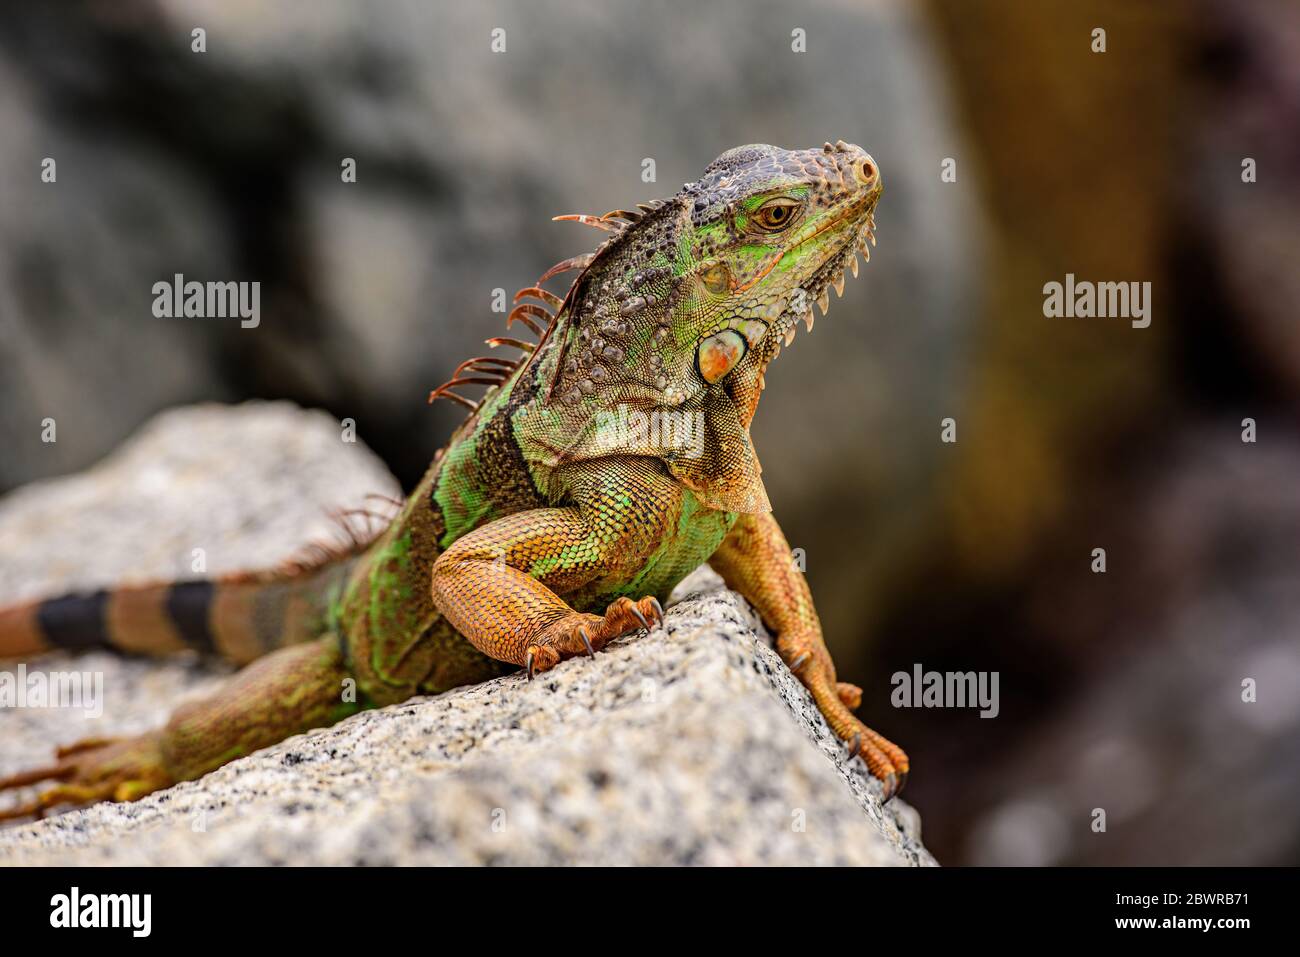 Green iguana also known as the American iguana is a lizard reptile in the genus Iguana in the iguana family. Stock Photo